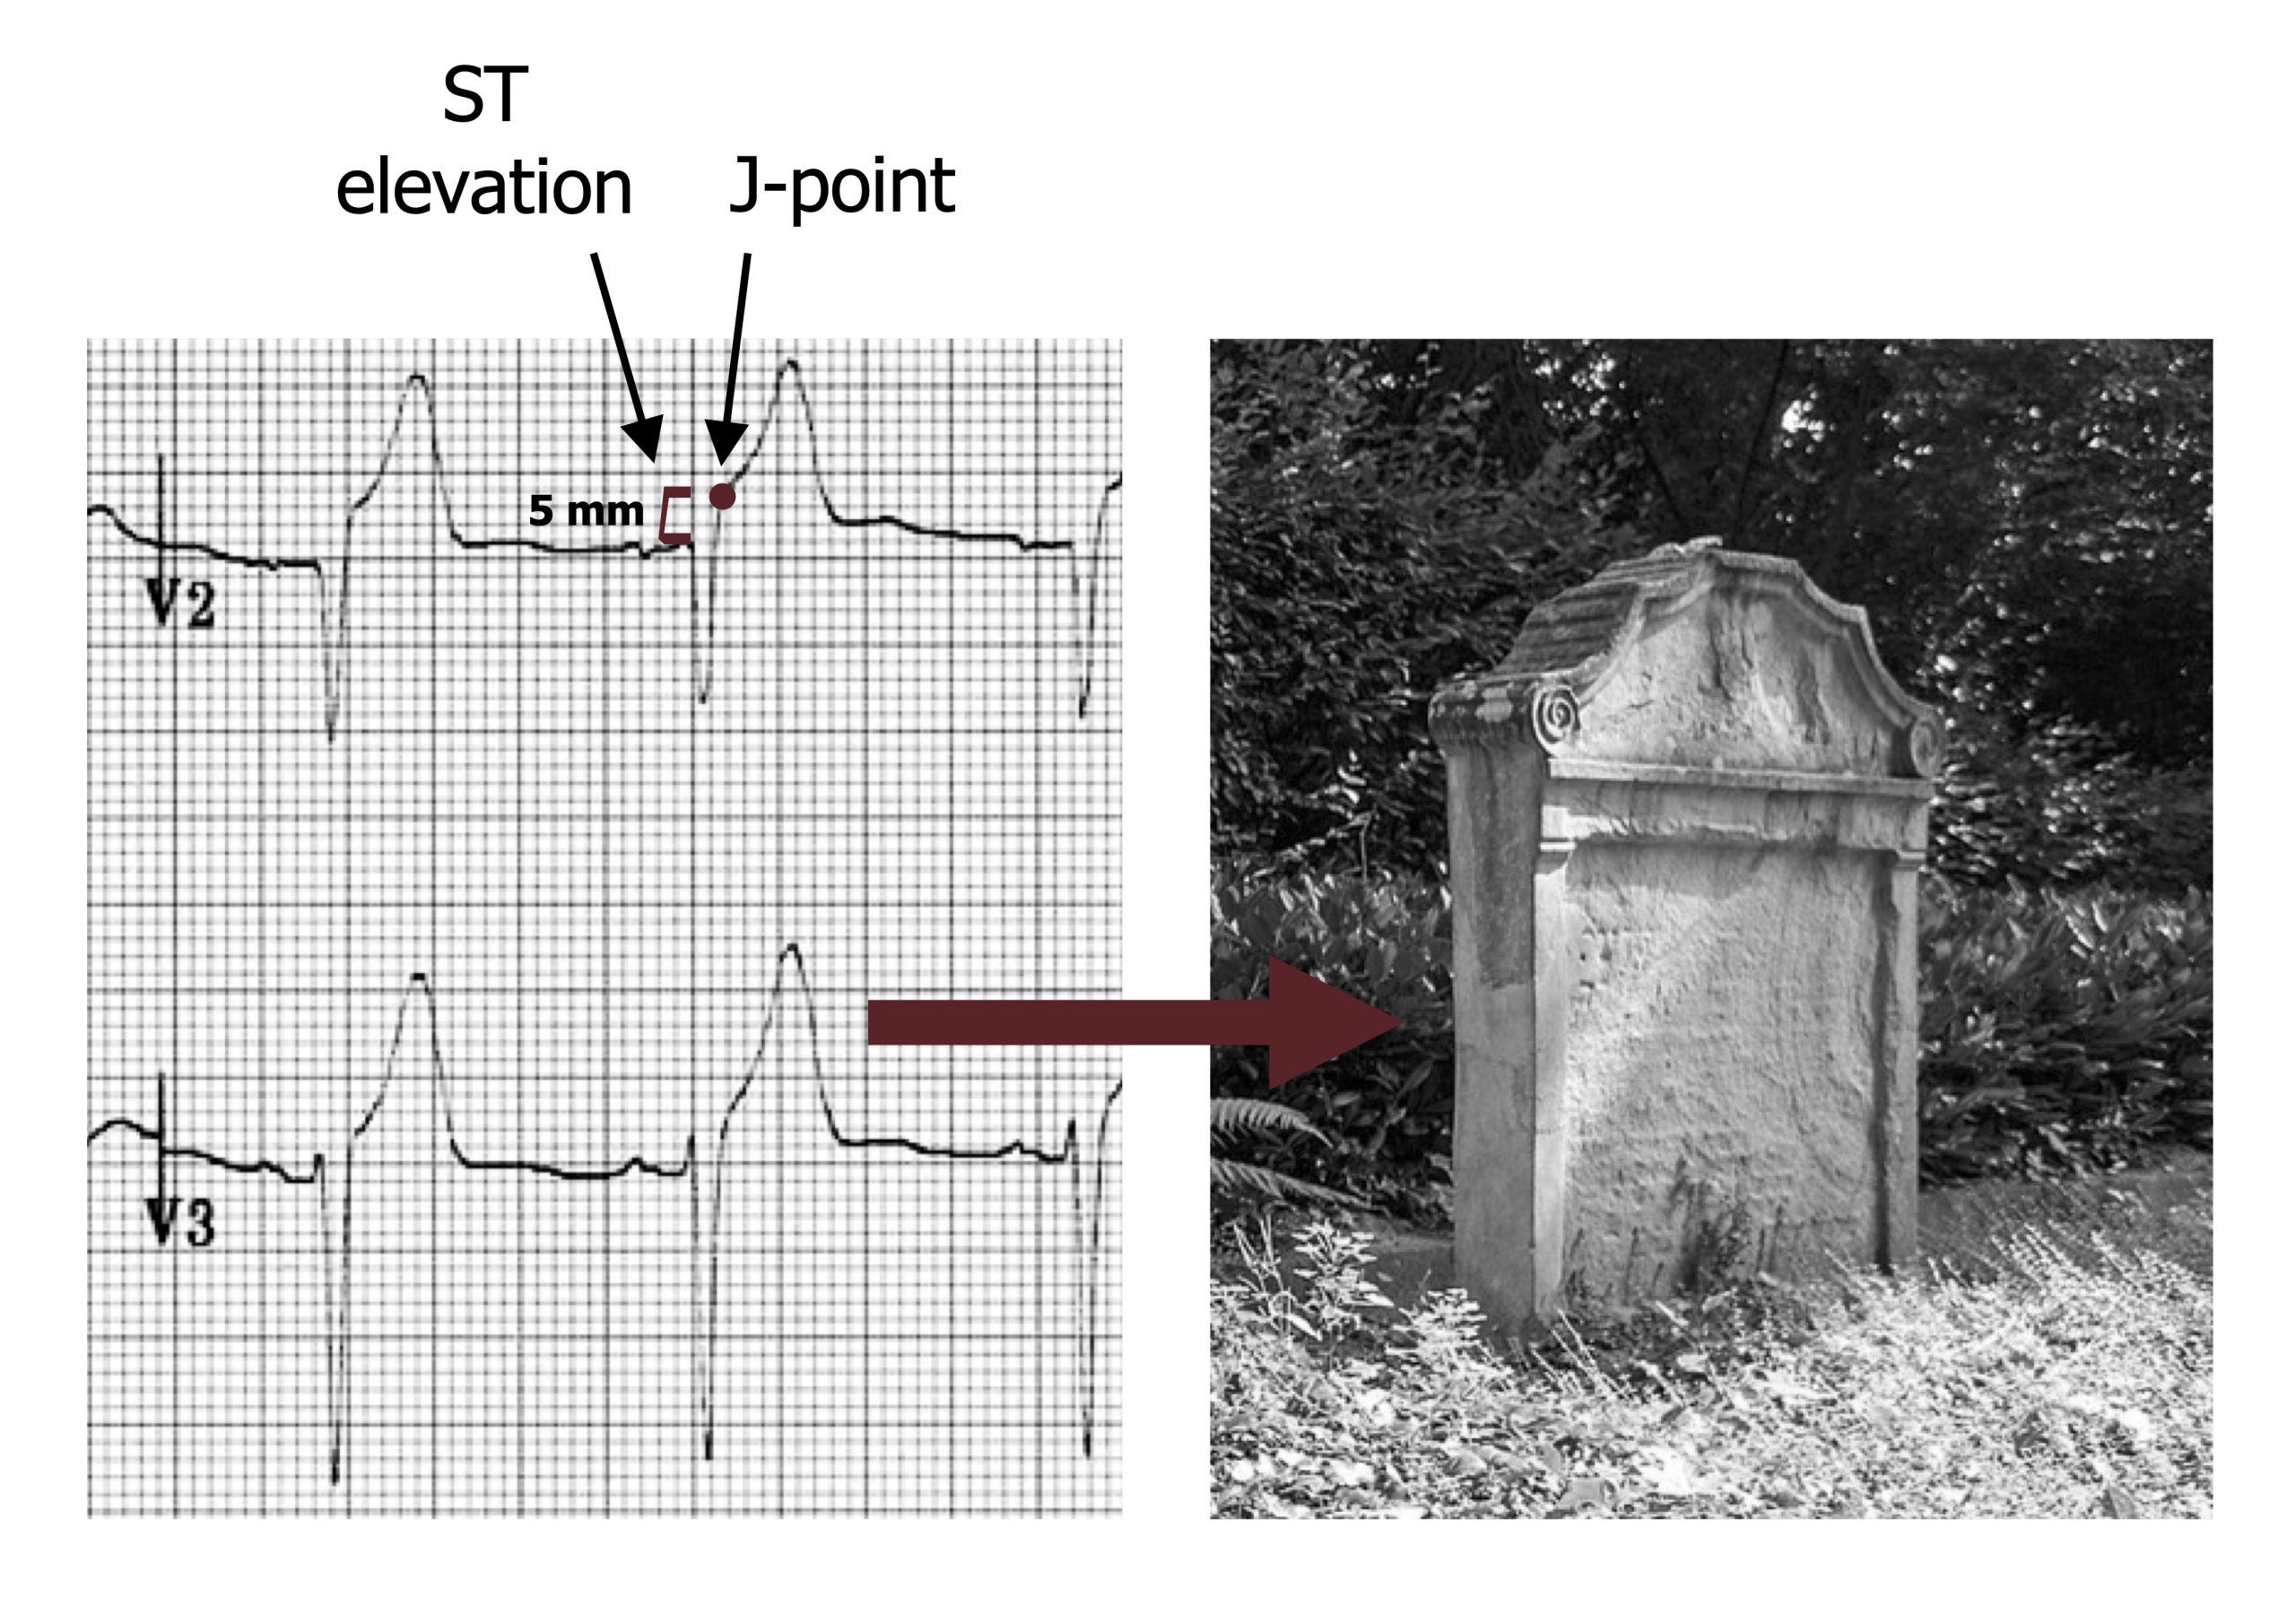 Leads V2 and V3 of an ECG are shown with two complete depolarizations. In both leads there is evidence of ST elevation and a measurement bar shows that the elevation is 5 mm. The elevated ST segment is labelled. Also labelled is a distinct J-point where the ascending portion of the S-wave transitions into the T-wave. The T-wave is tall and broad and has taken on a tombstone appearance. A photograph of a tombstone is shown next to the ECG, the tombstone has a rectangular shape with a curved top.